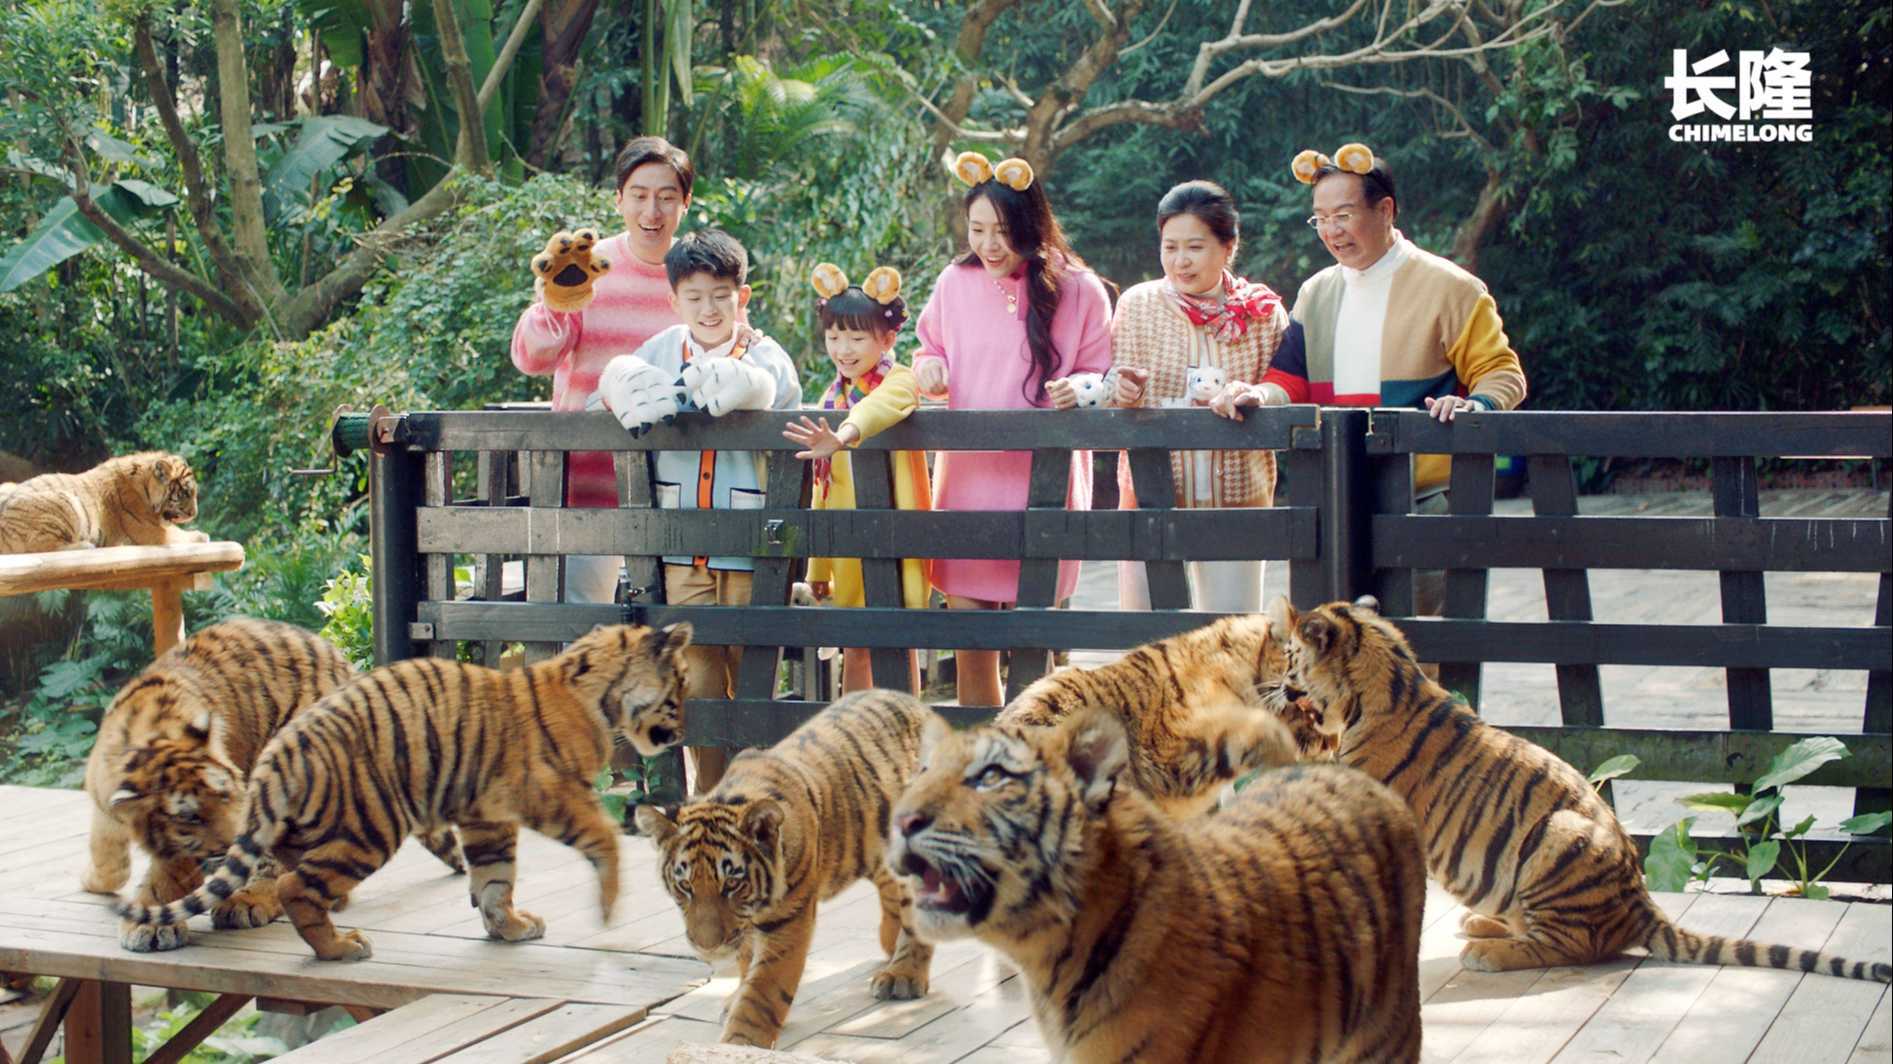 CHIMELONG -The year of the tiger TVC